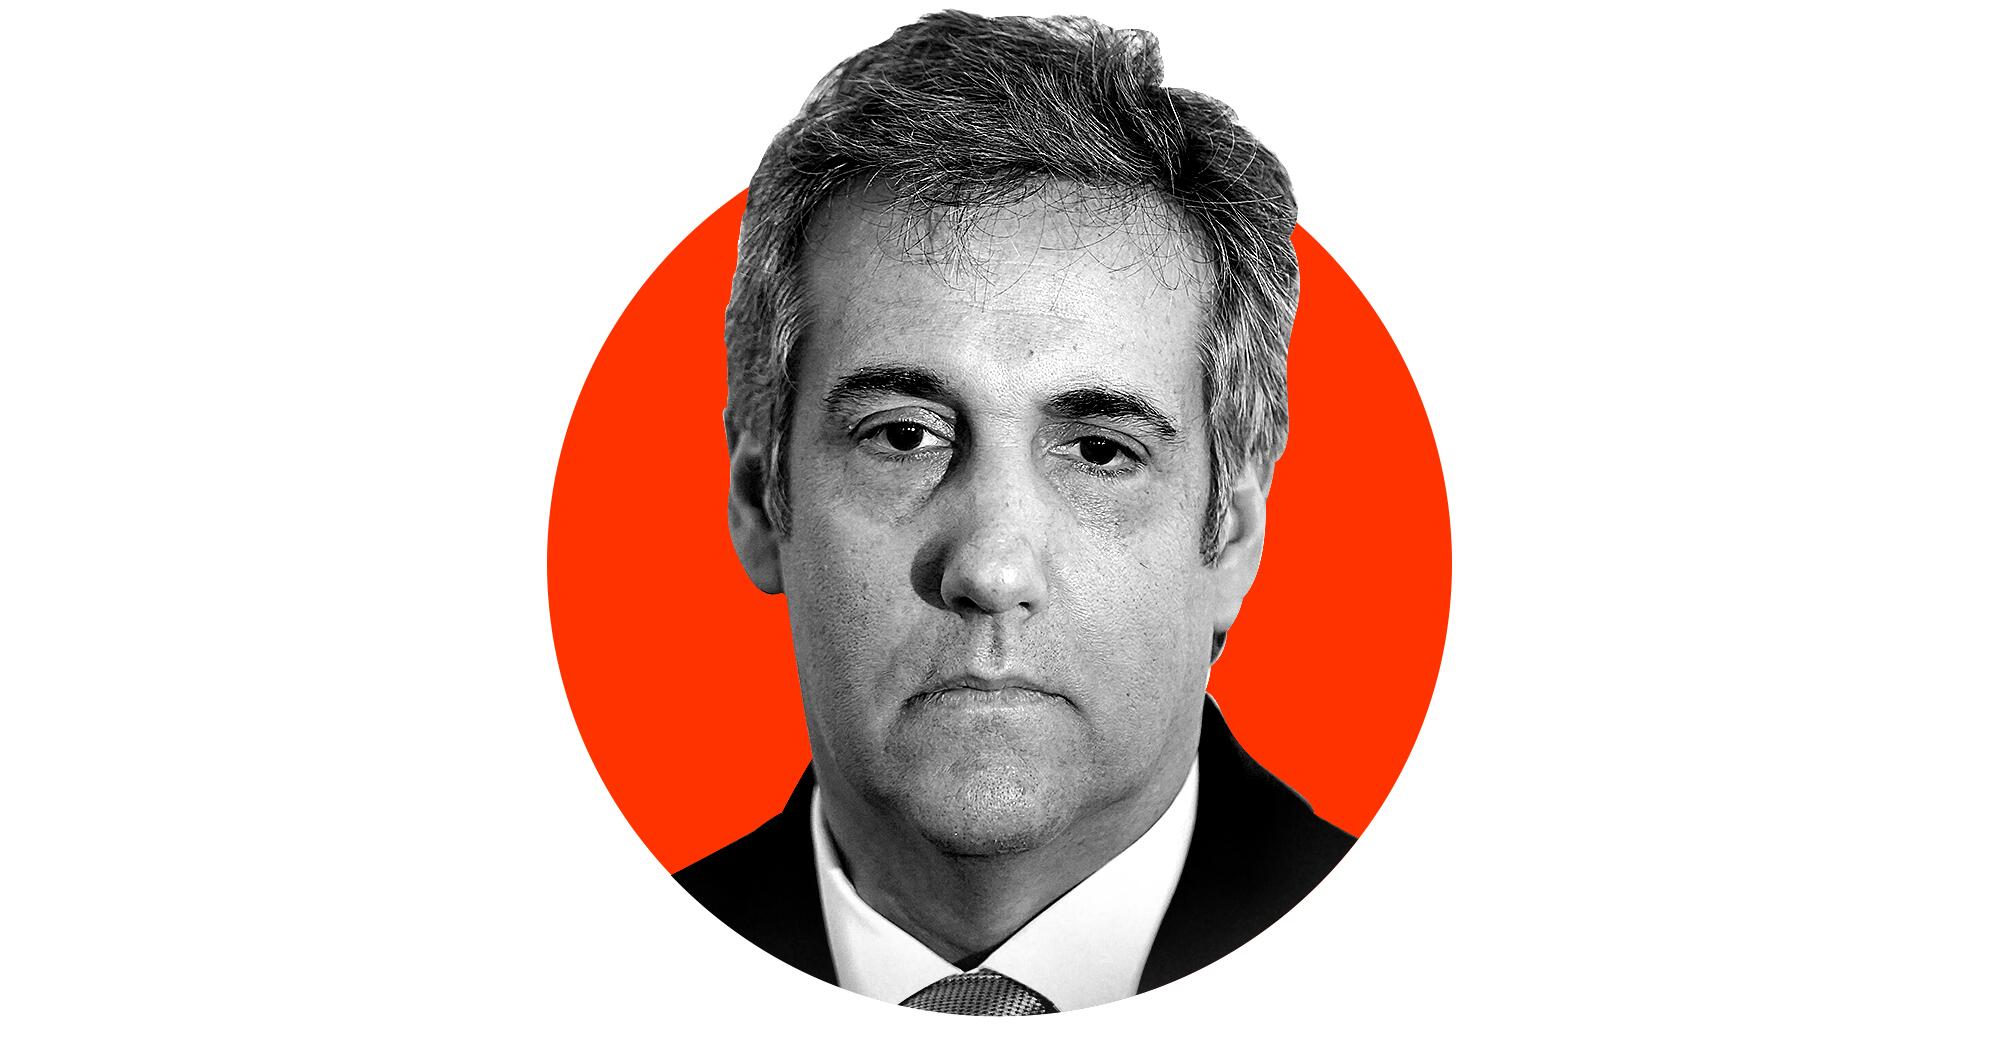 A photo illustration of a black-and-white photo of former Trump lawyer Michael Cohen's  head emerging from a red circle